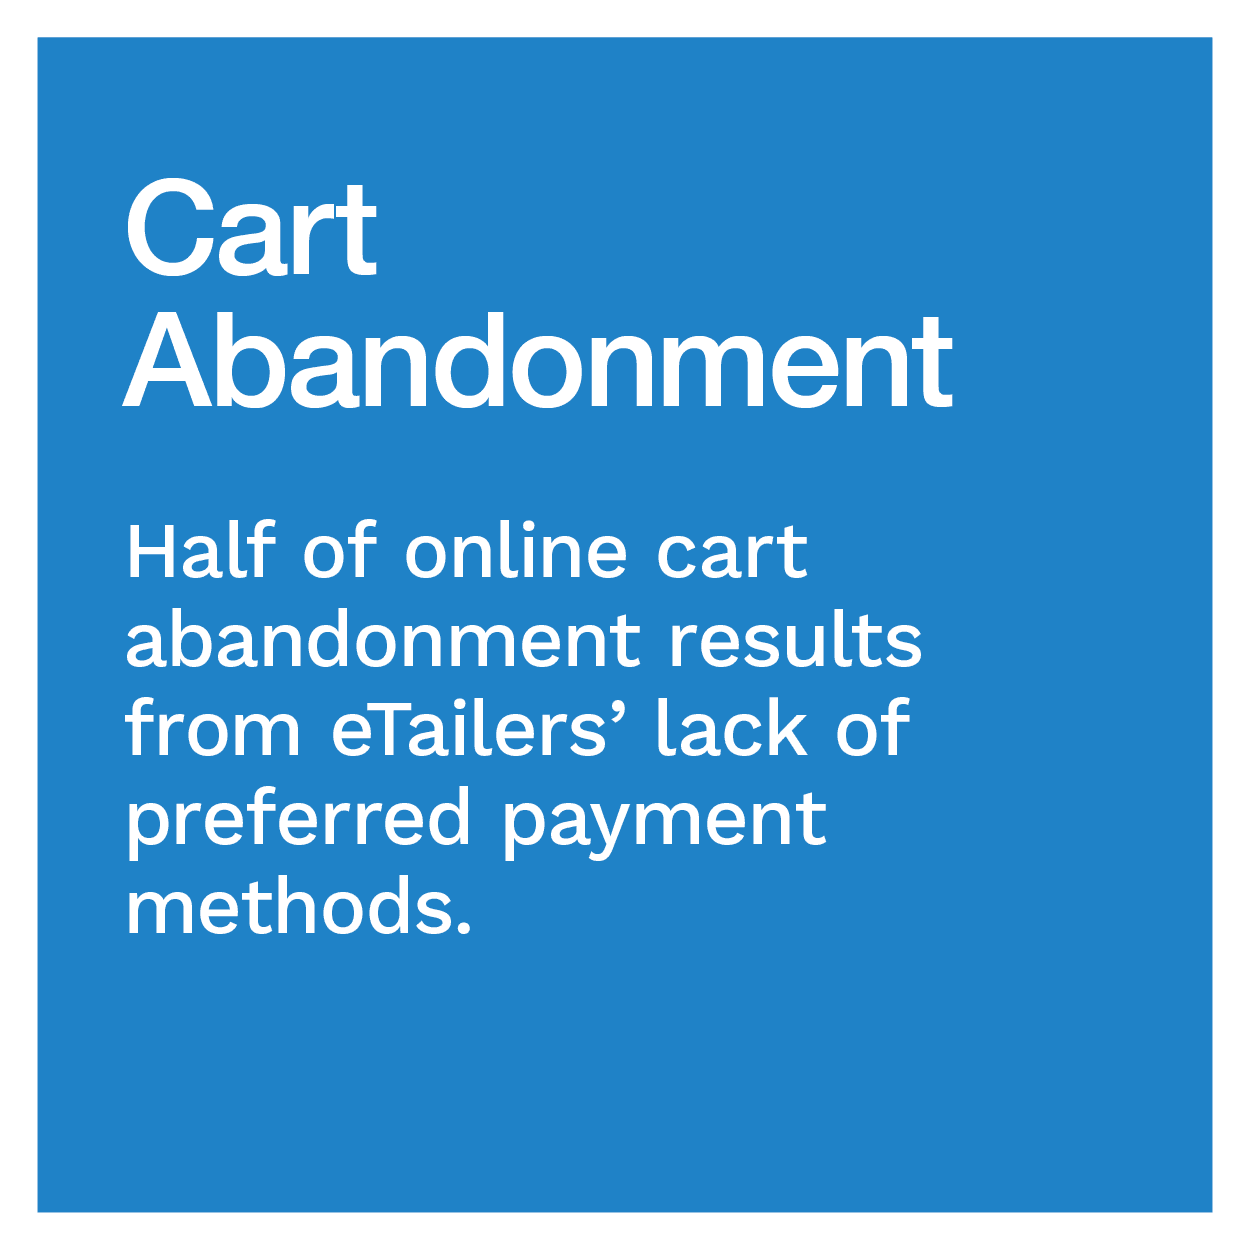 Cart Abandonment: Half of online cart abandonment results from eTailers’ lack of preferred payment methods.